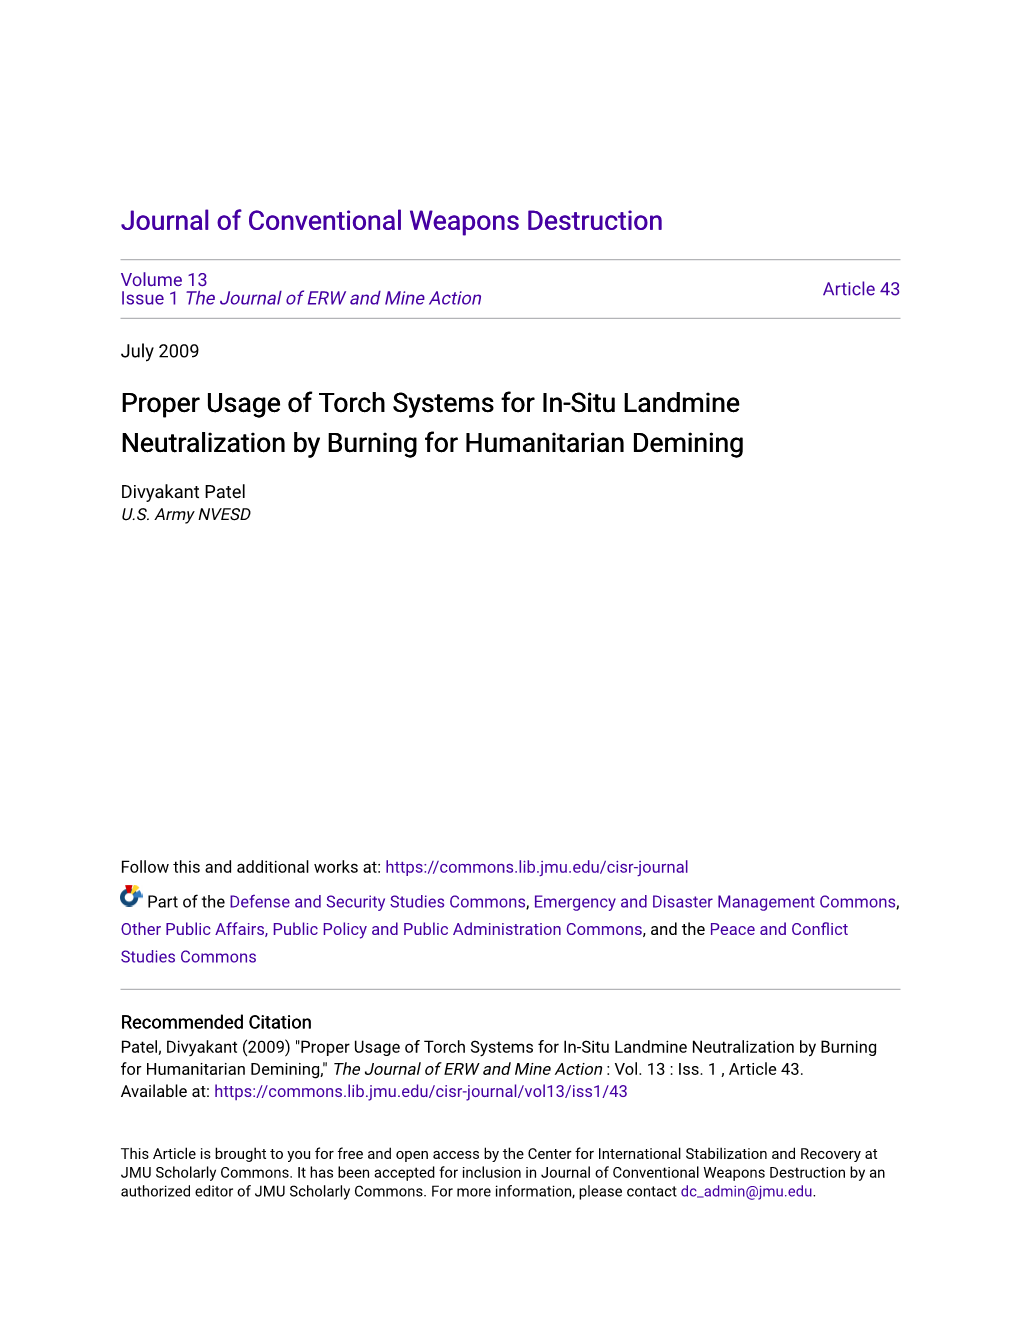 Proper Usage of Torch Systems for In-Situ Landmine Neutralization by Burning for Humanitarian Demining